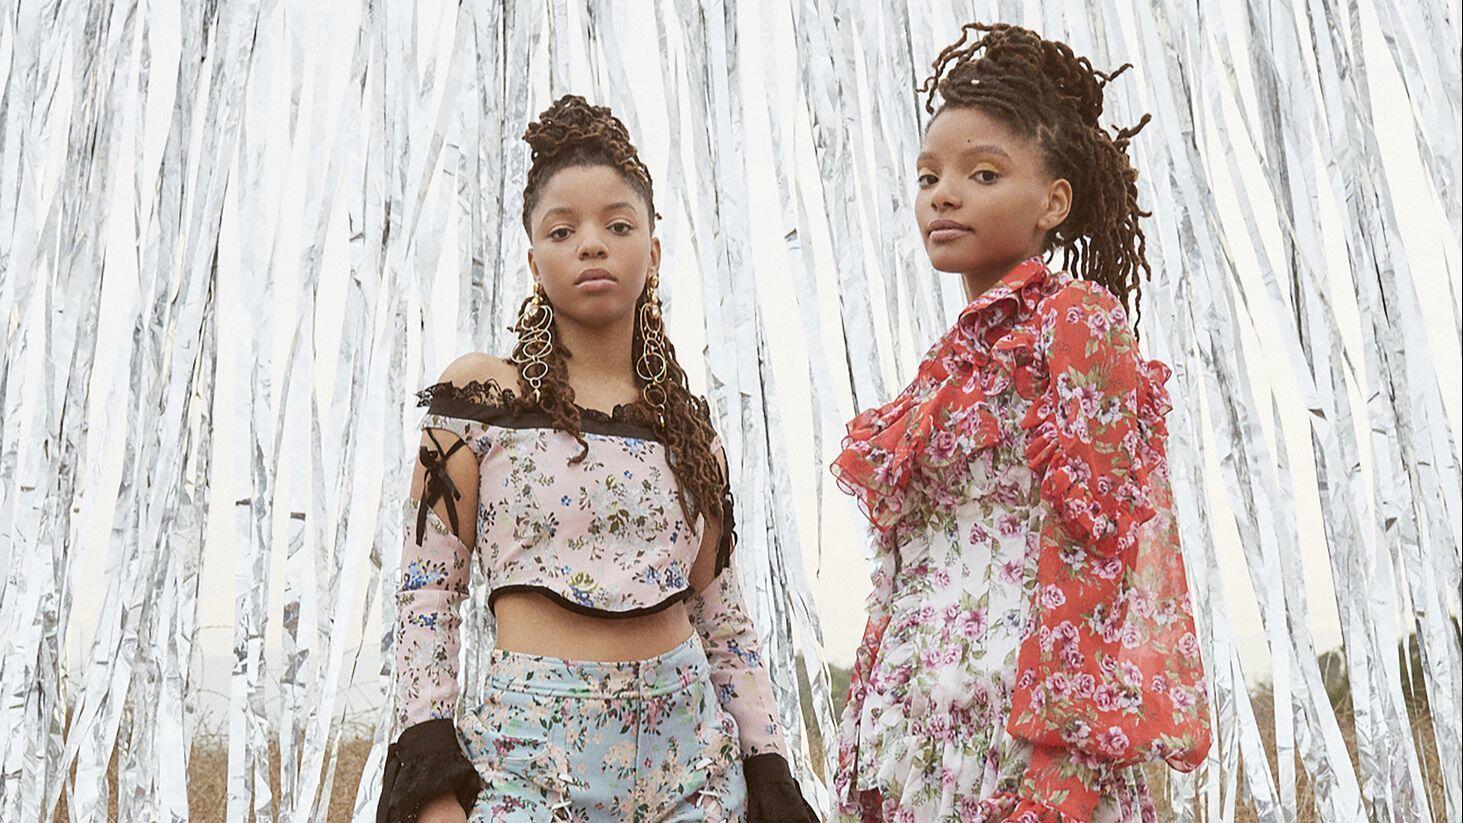 Chloe X Halle Kick Off 'On The Run II' Tour with Beyonce & Jay-Z!: Photo  1174878, Chloe Bailey, Chloe X Halle, Halle Bailey Pictures